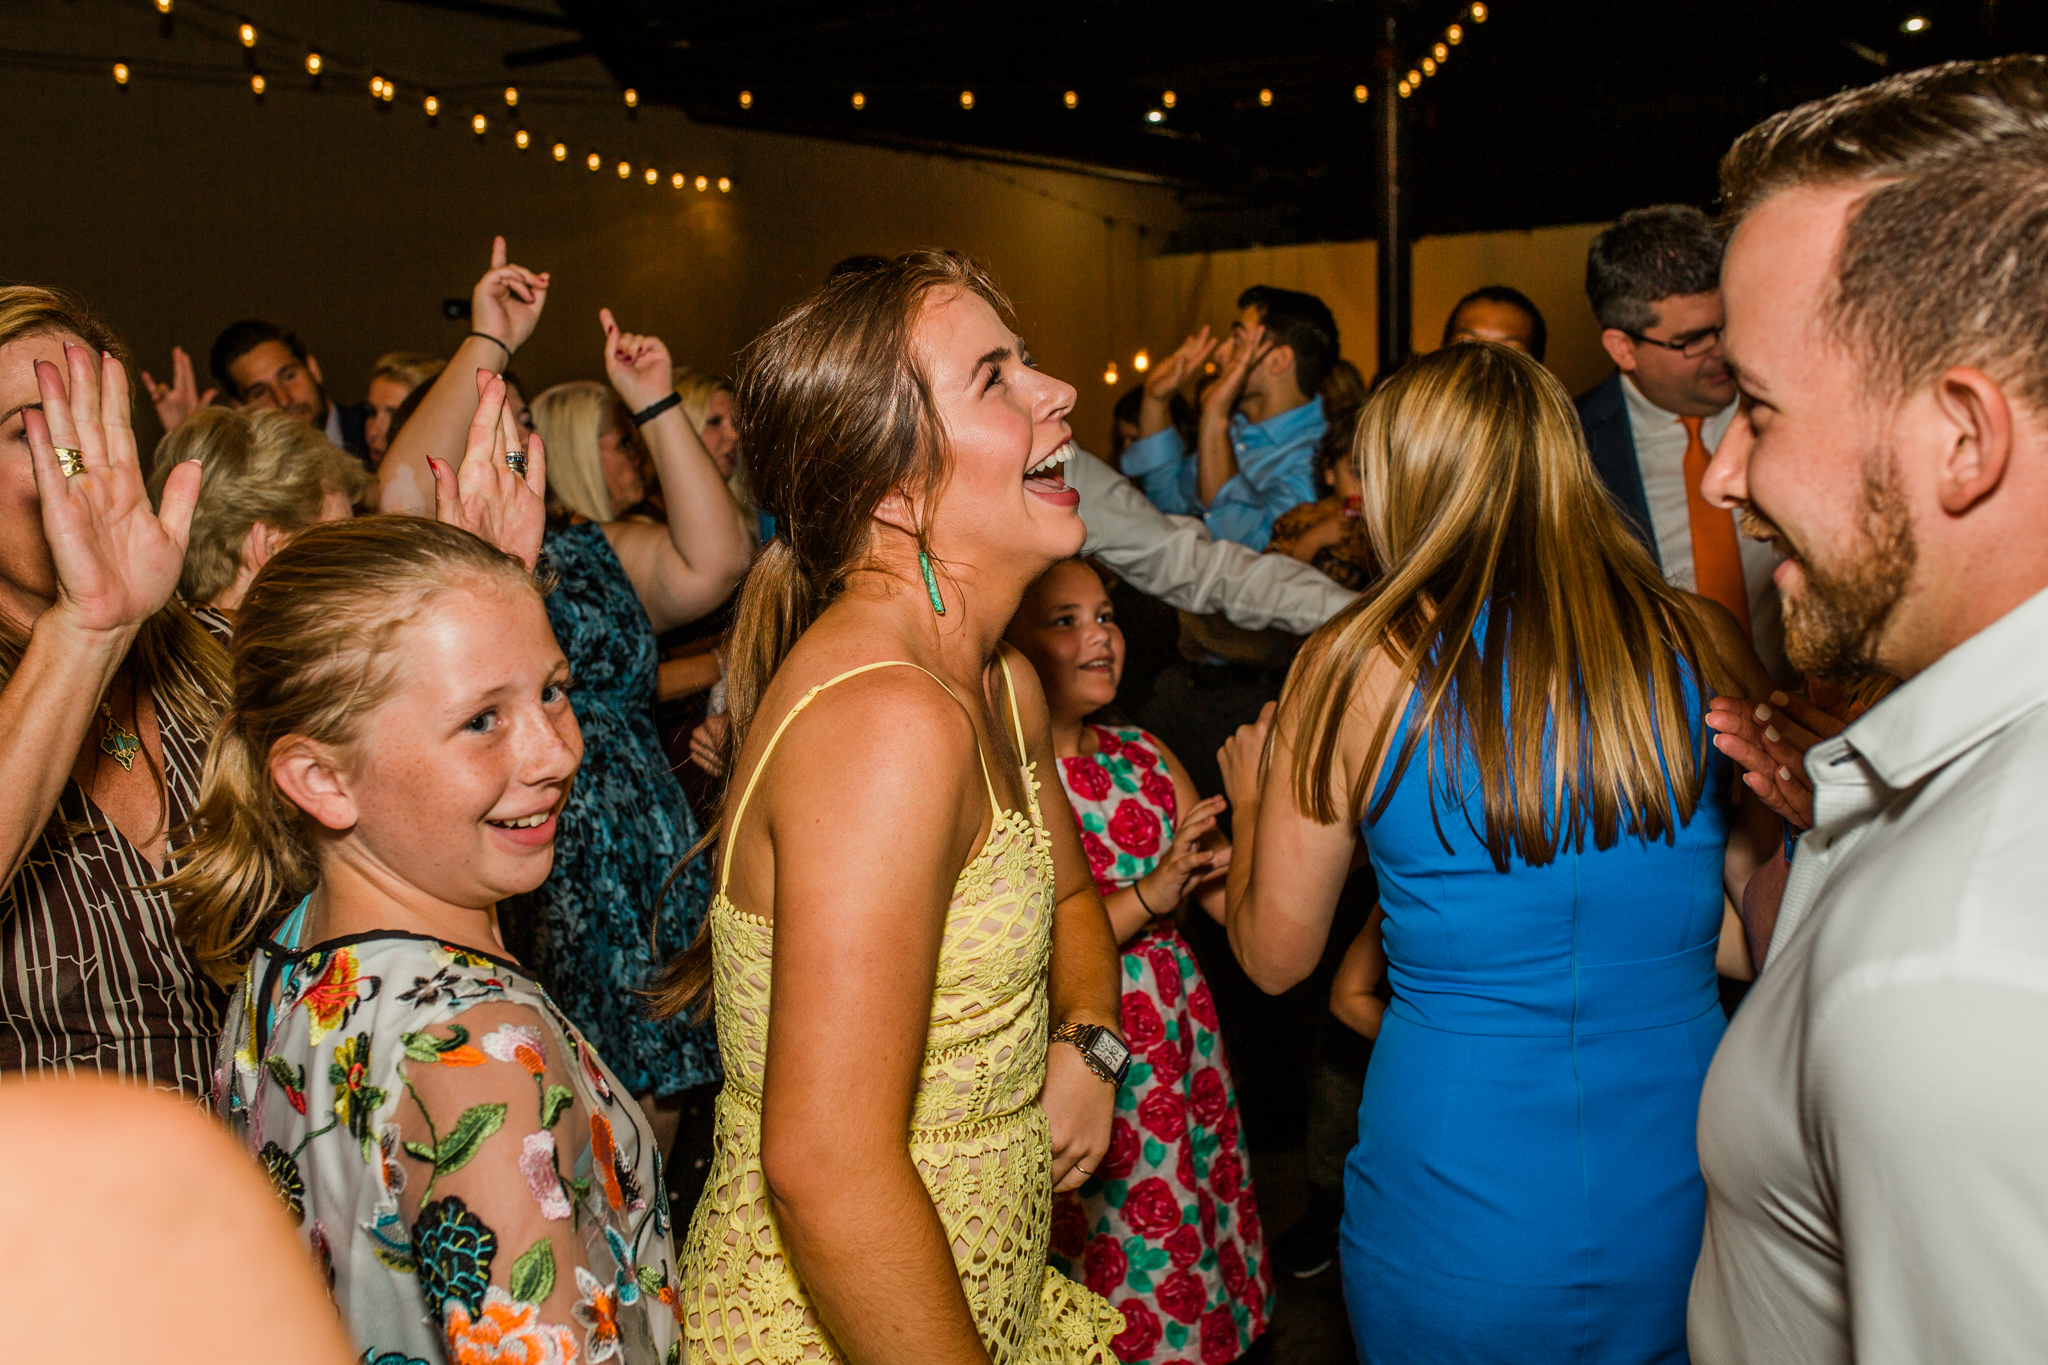  Tips To Keep People From Leaving Your Wedding Reception Early, Wichita Wedding Photographer, Wichita Ks Wedding Photographer, Kansas Wedding Photographer, Midwest Wedding Photographer, Wedding Planning Tips 